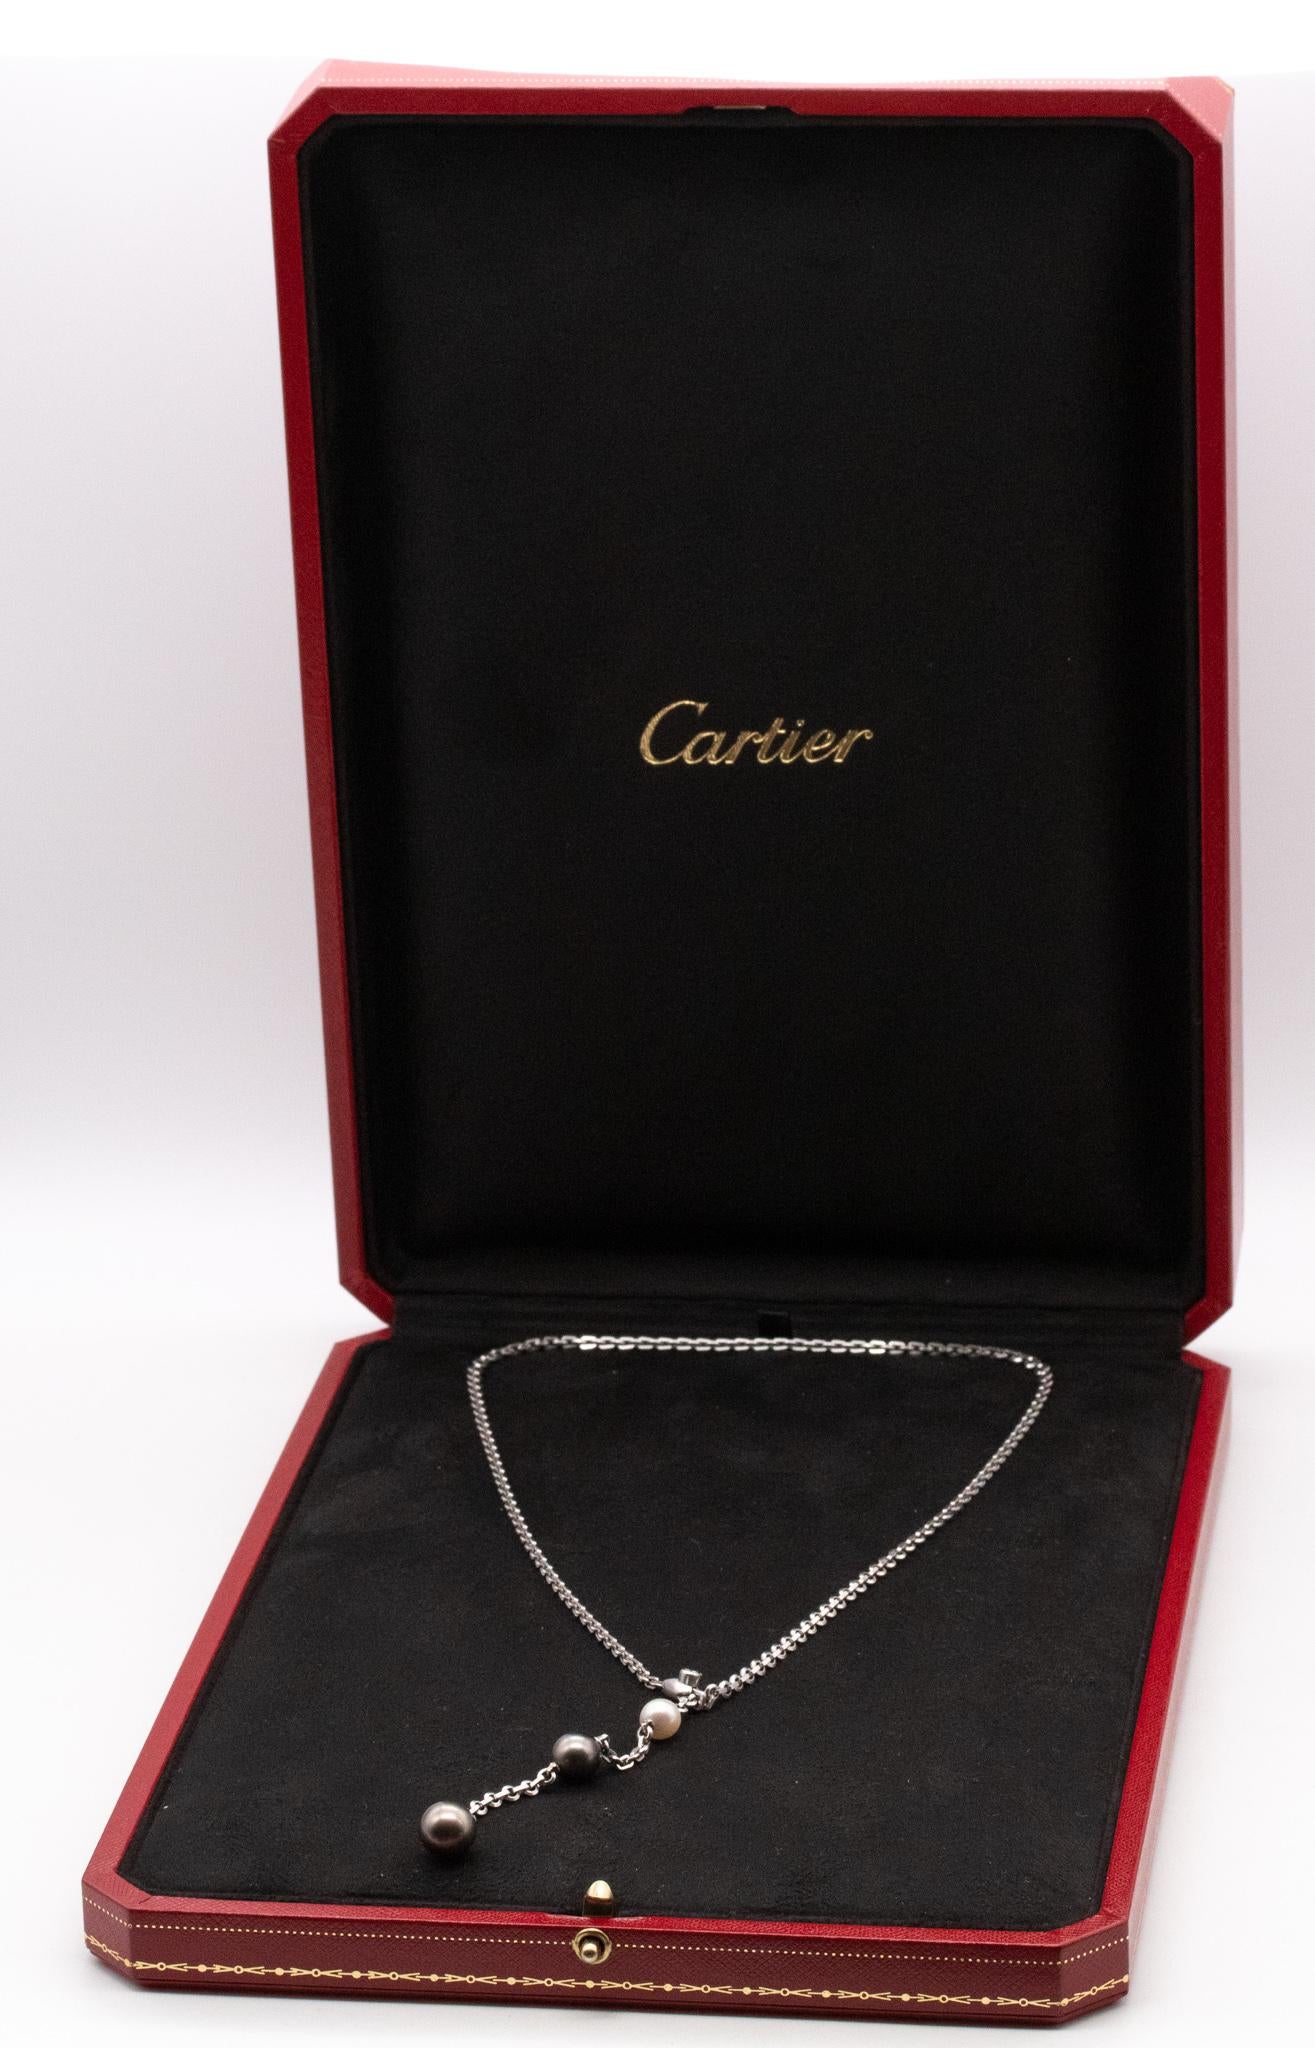 Contemporary Cartier Paris Modern Lariat Necklace in 18Kt White Gold 1 Diamond Three Pearls For Sale